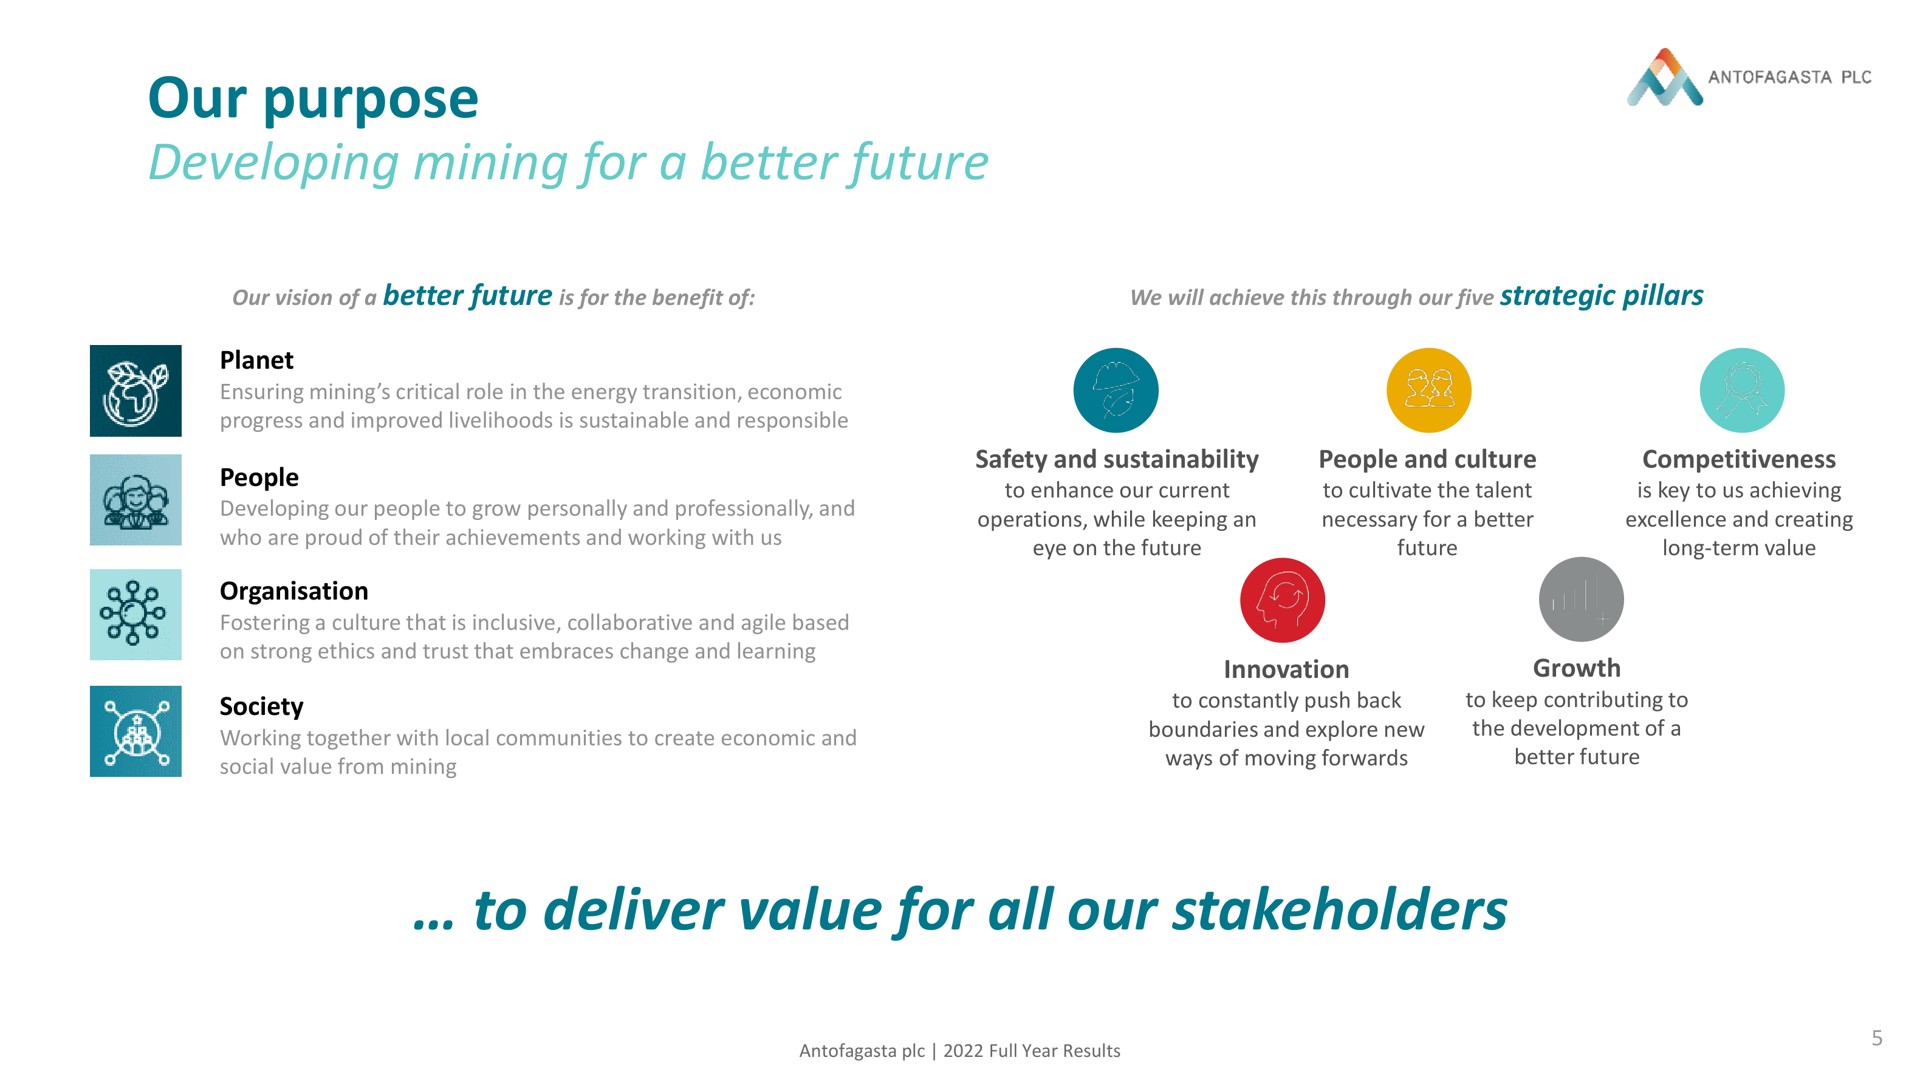 our purpose developing mining for a better future to deliver value for all our stakeholders | Antofagasta